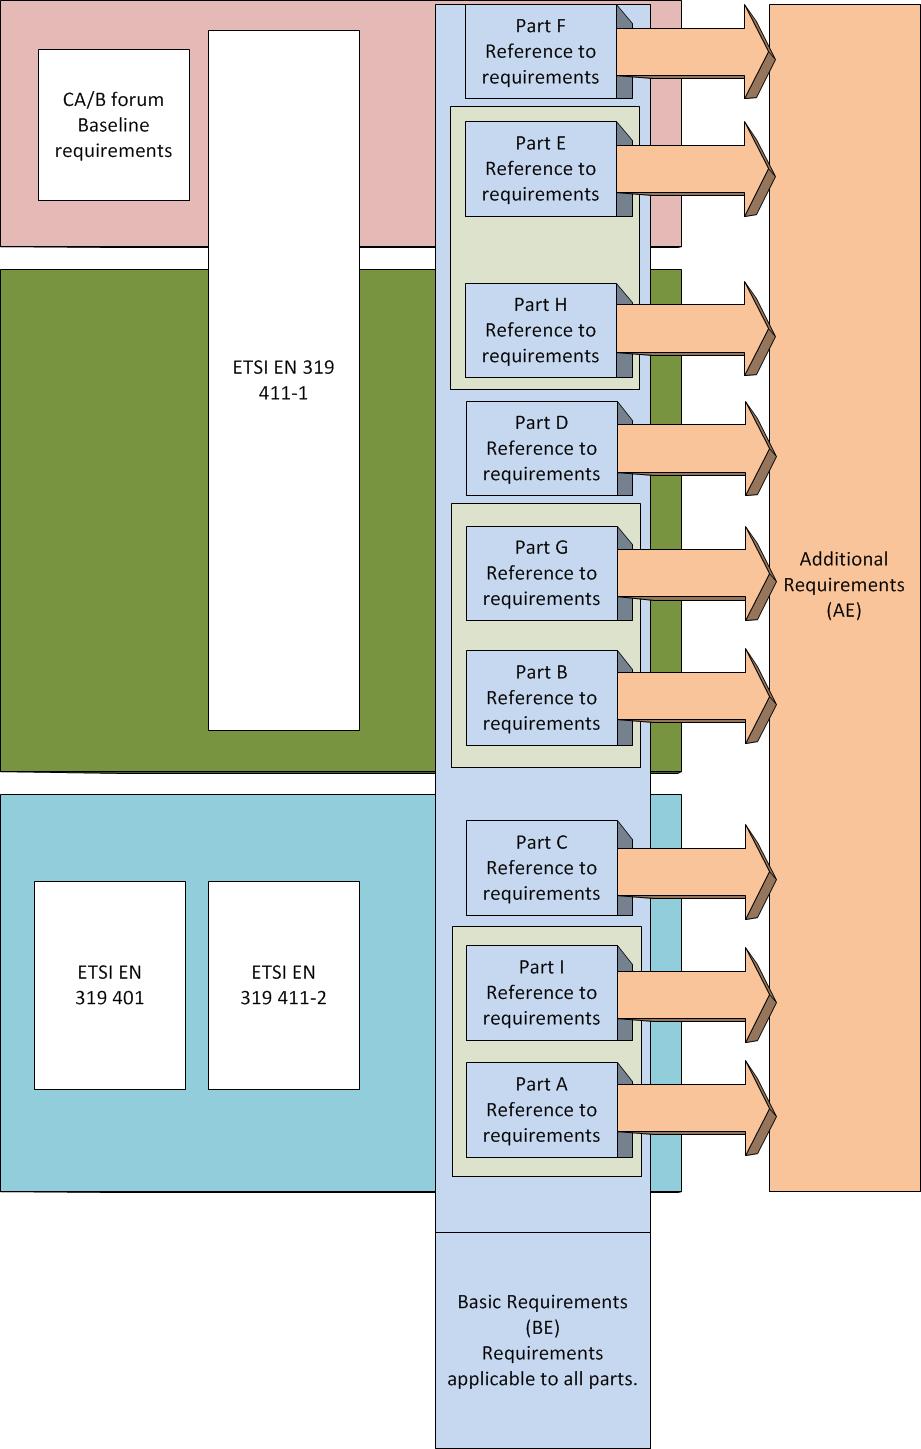 Graphical overview of the structure of part 3 of the Programme of Requirements